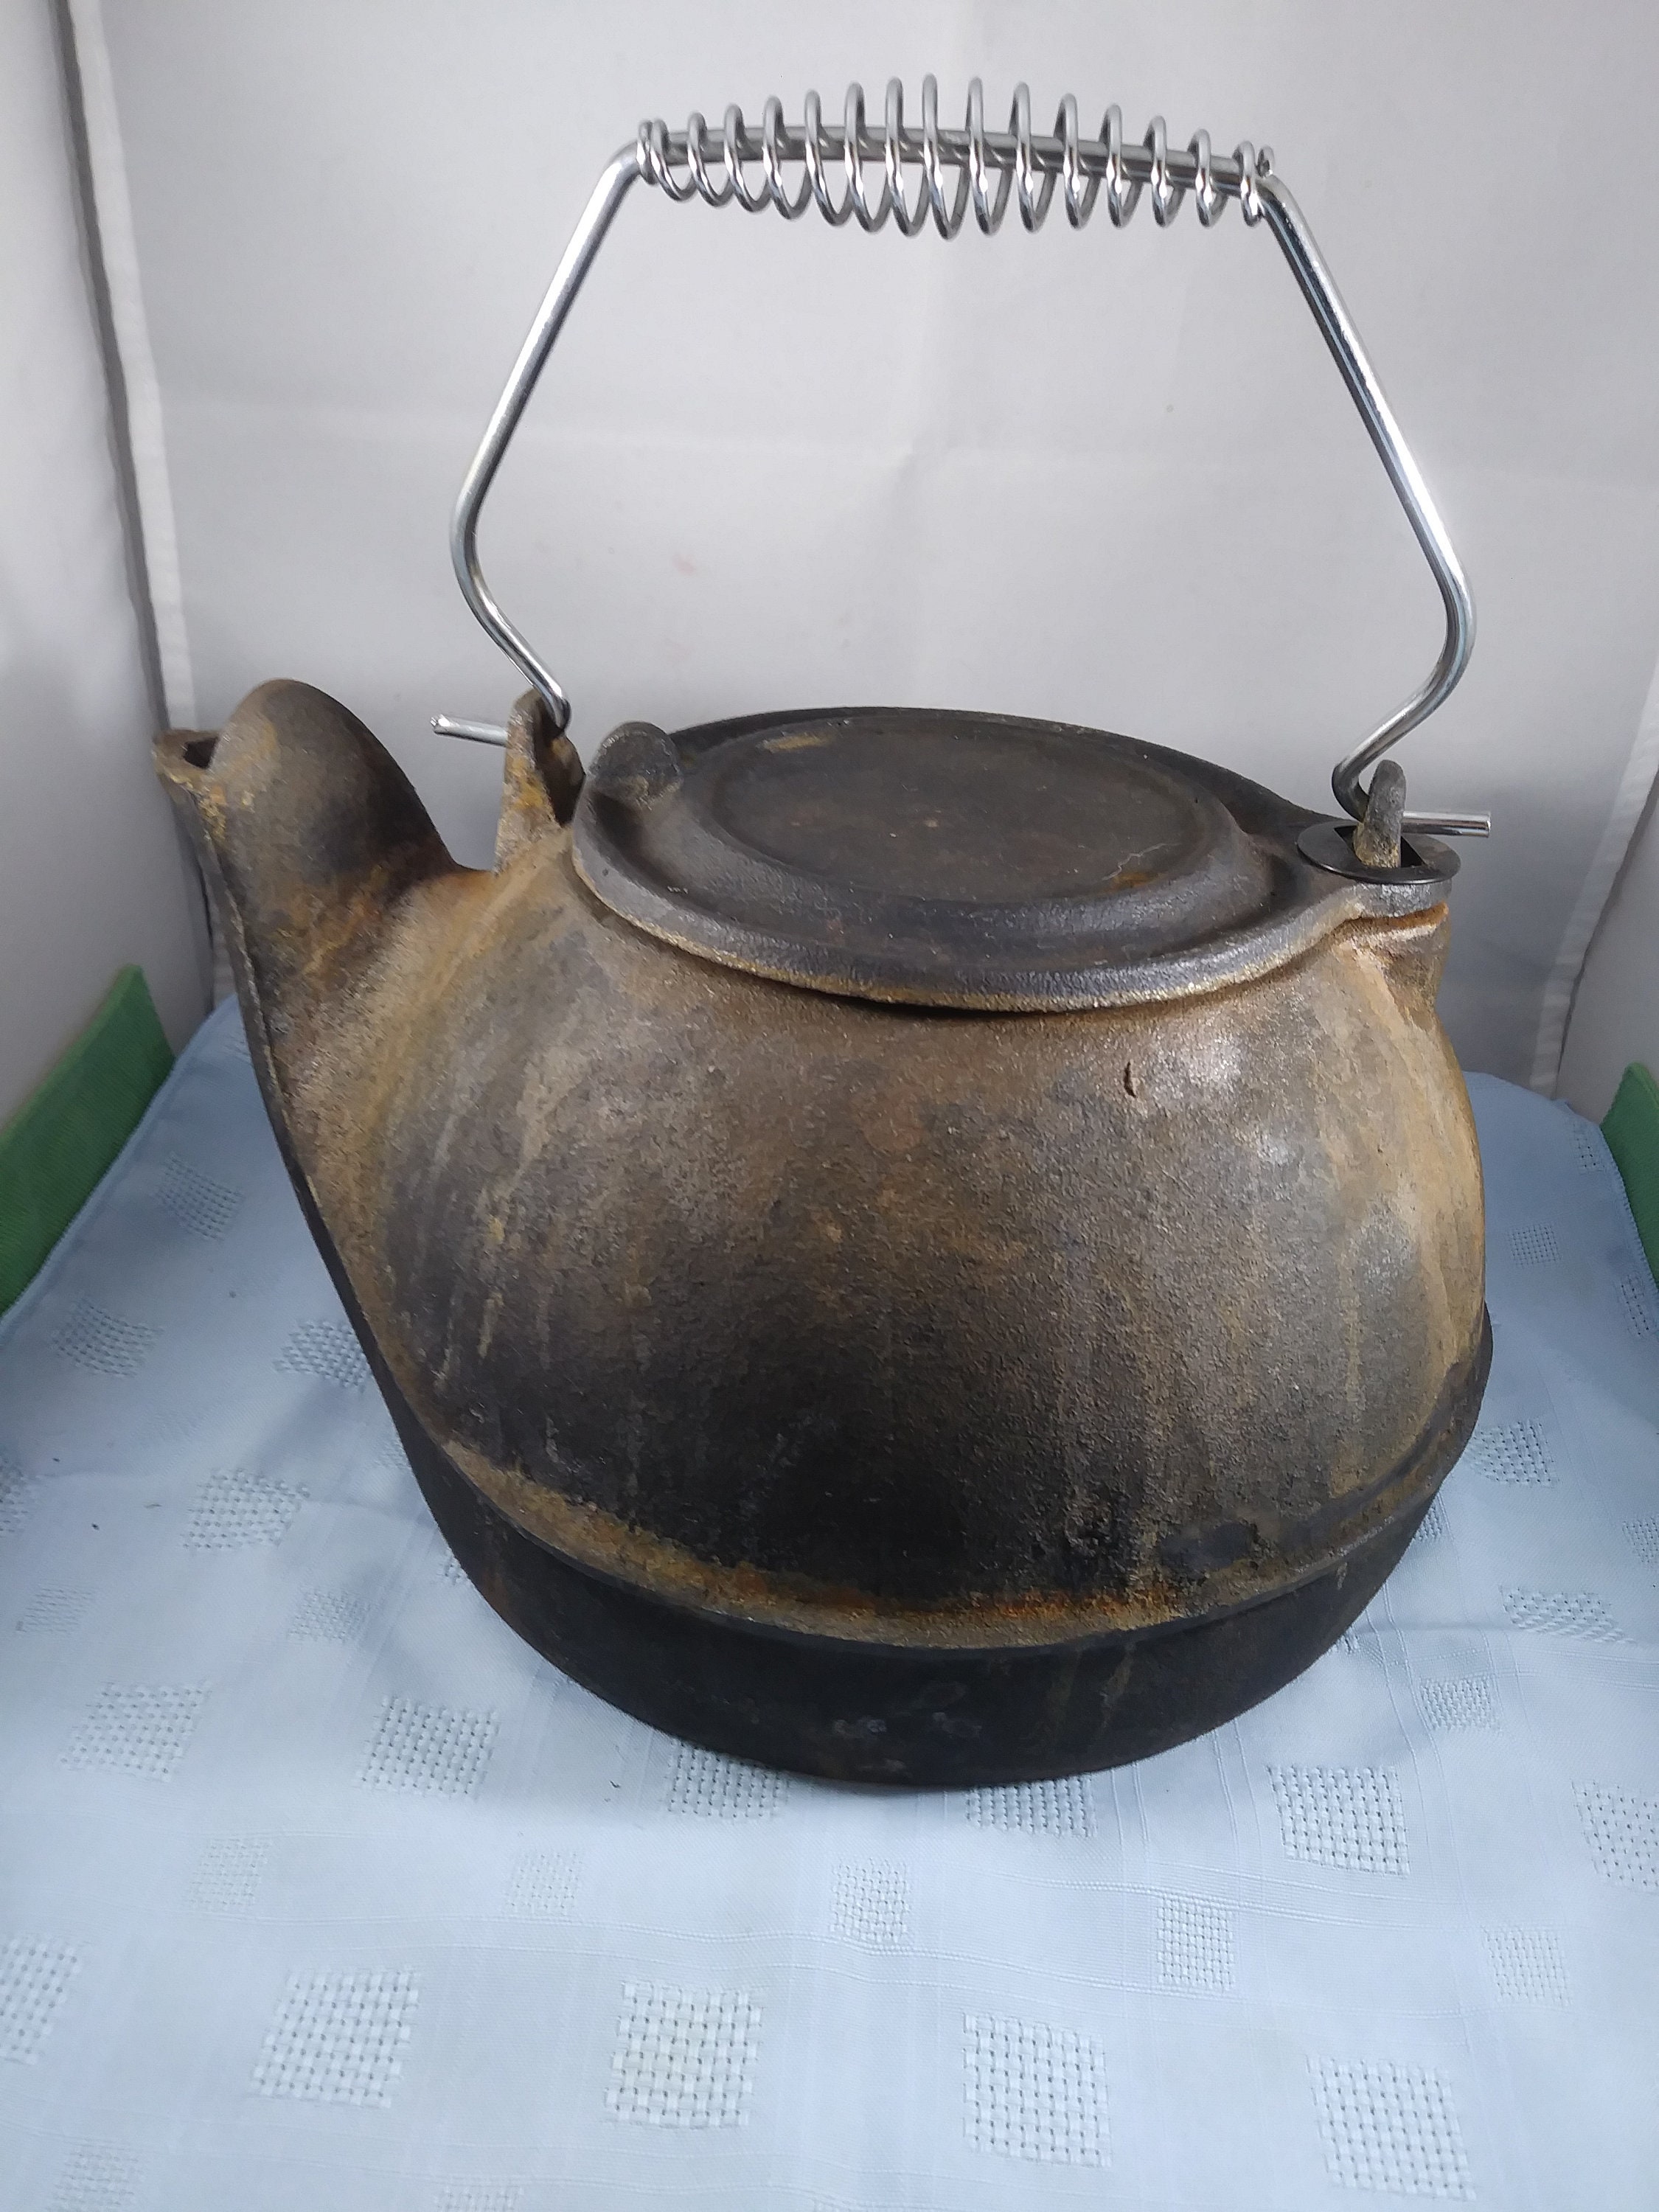 Early 19th Century Cast Iron Pot or Kettle at 1stDibs